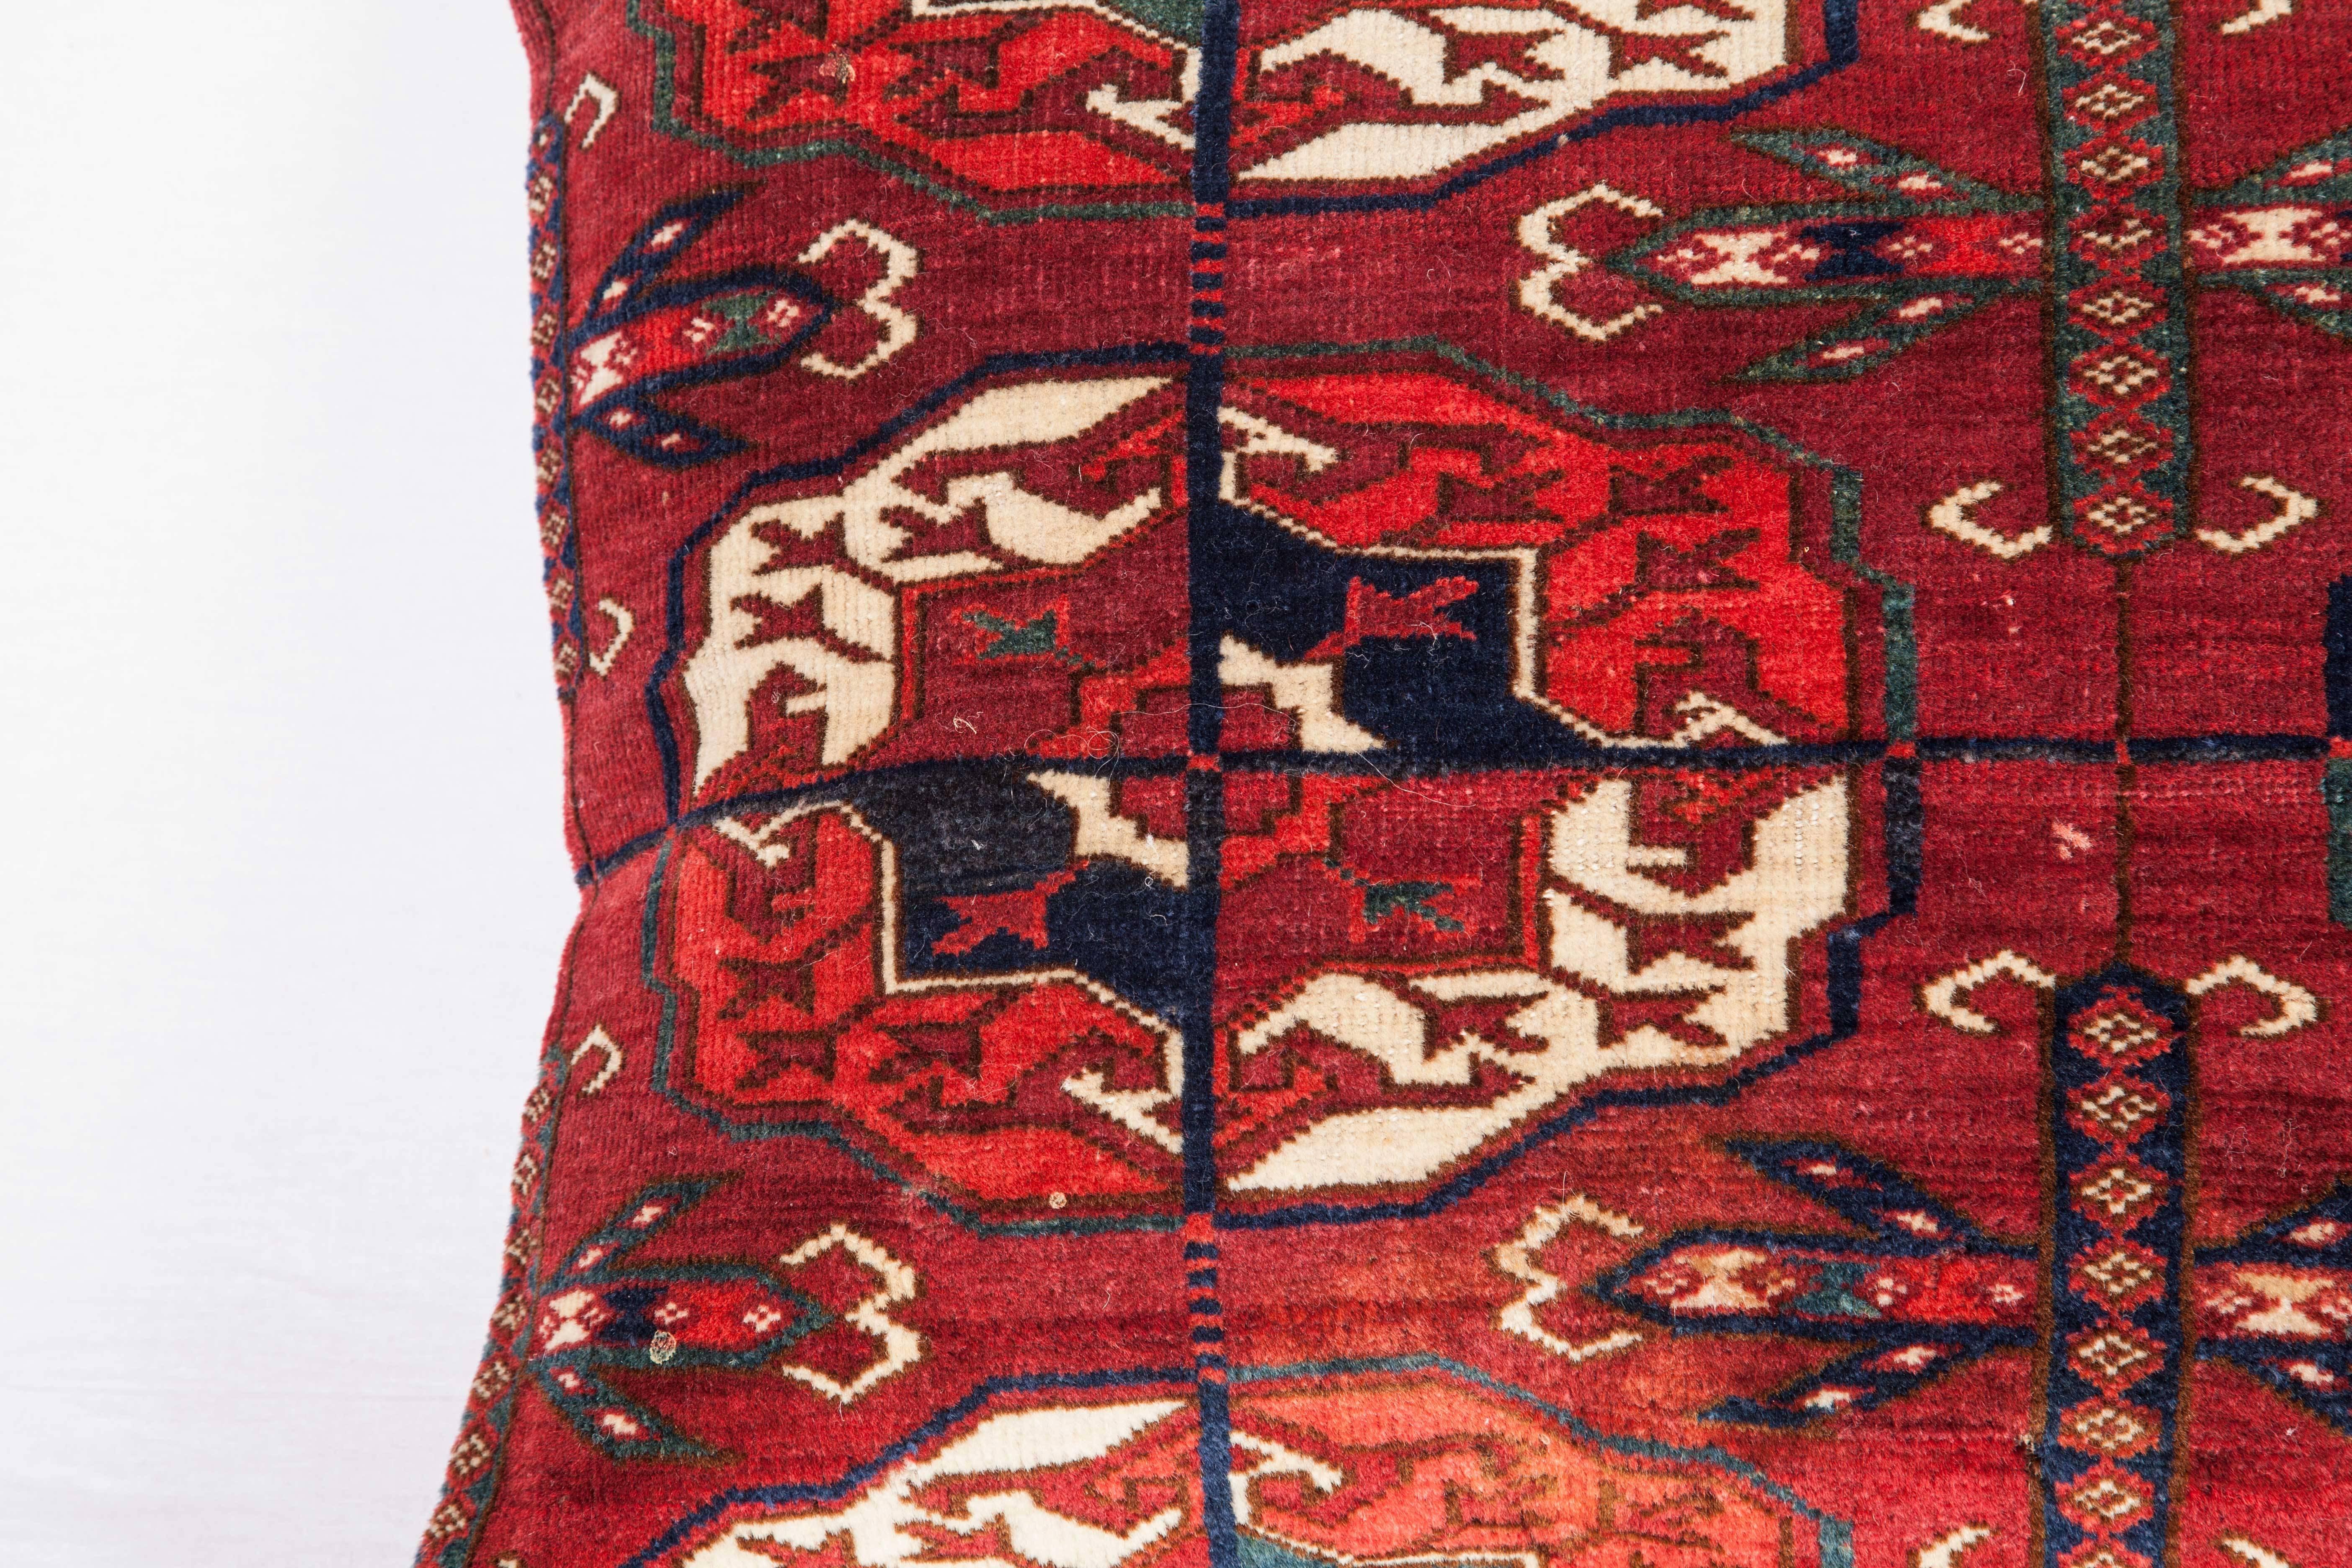 The pillow is made out of a early 19th century, Turkmen Tekke rug. It does not come with an insert but it comes with a bag made to the size and out of cotton to accommodate the filling. The backing is made of linen. Please note filling is not